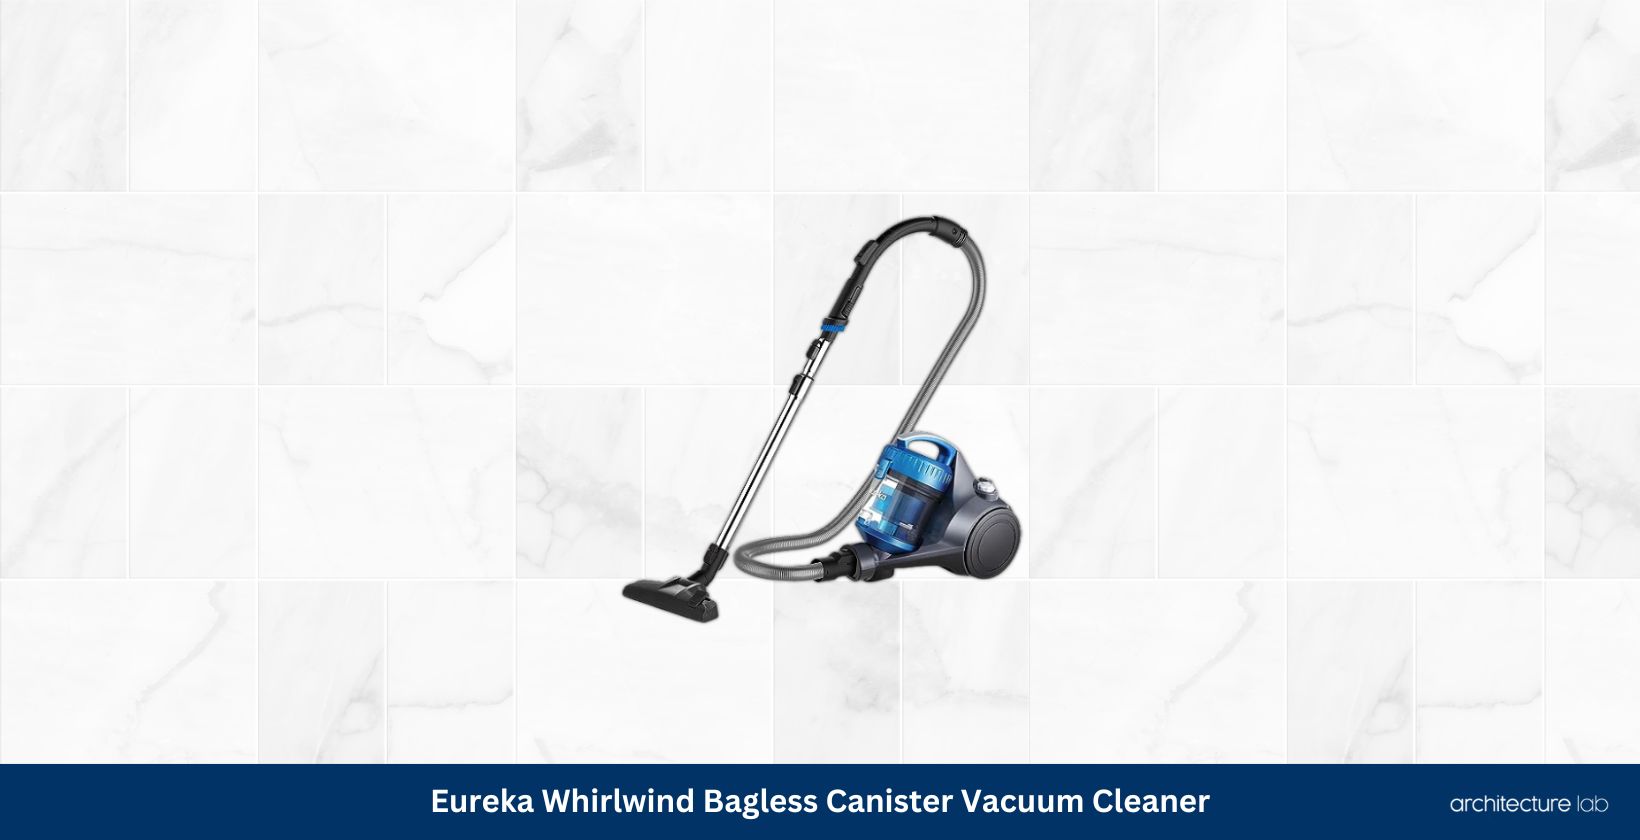 Eureka whirlwind bagless canister vacuum cleaner nen110a